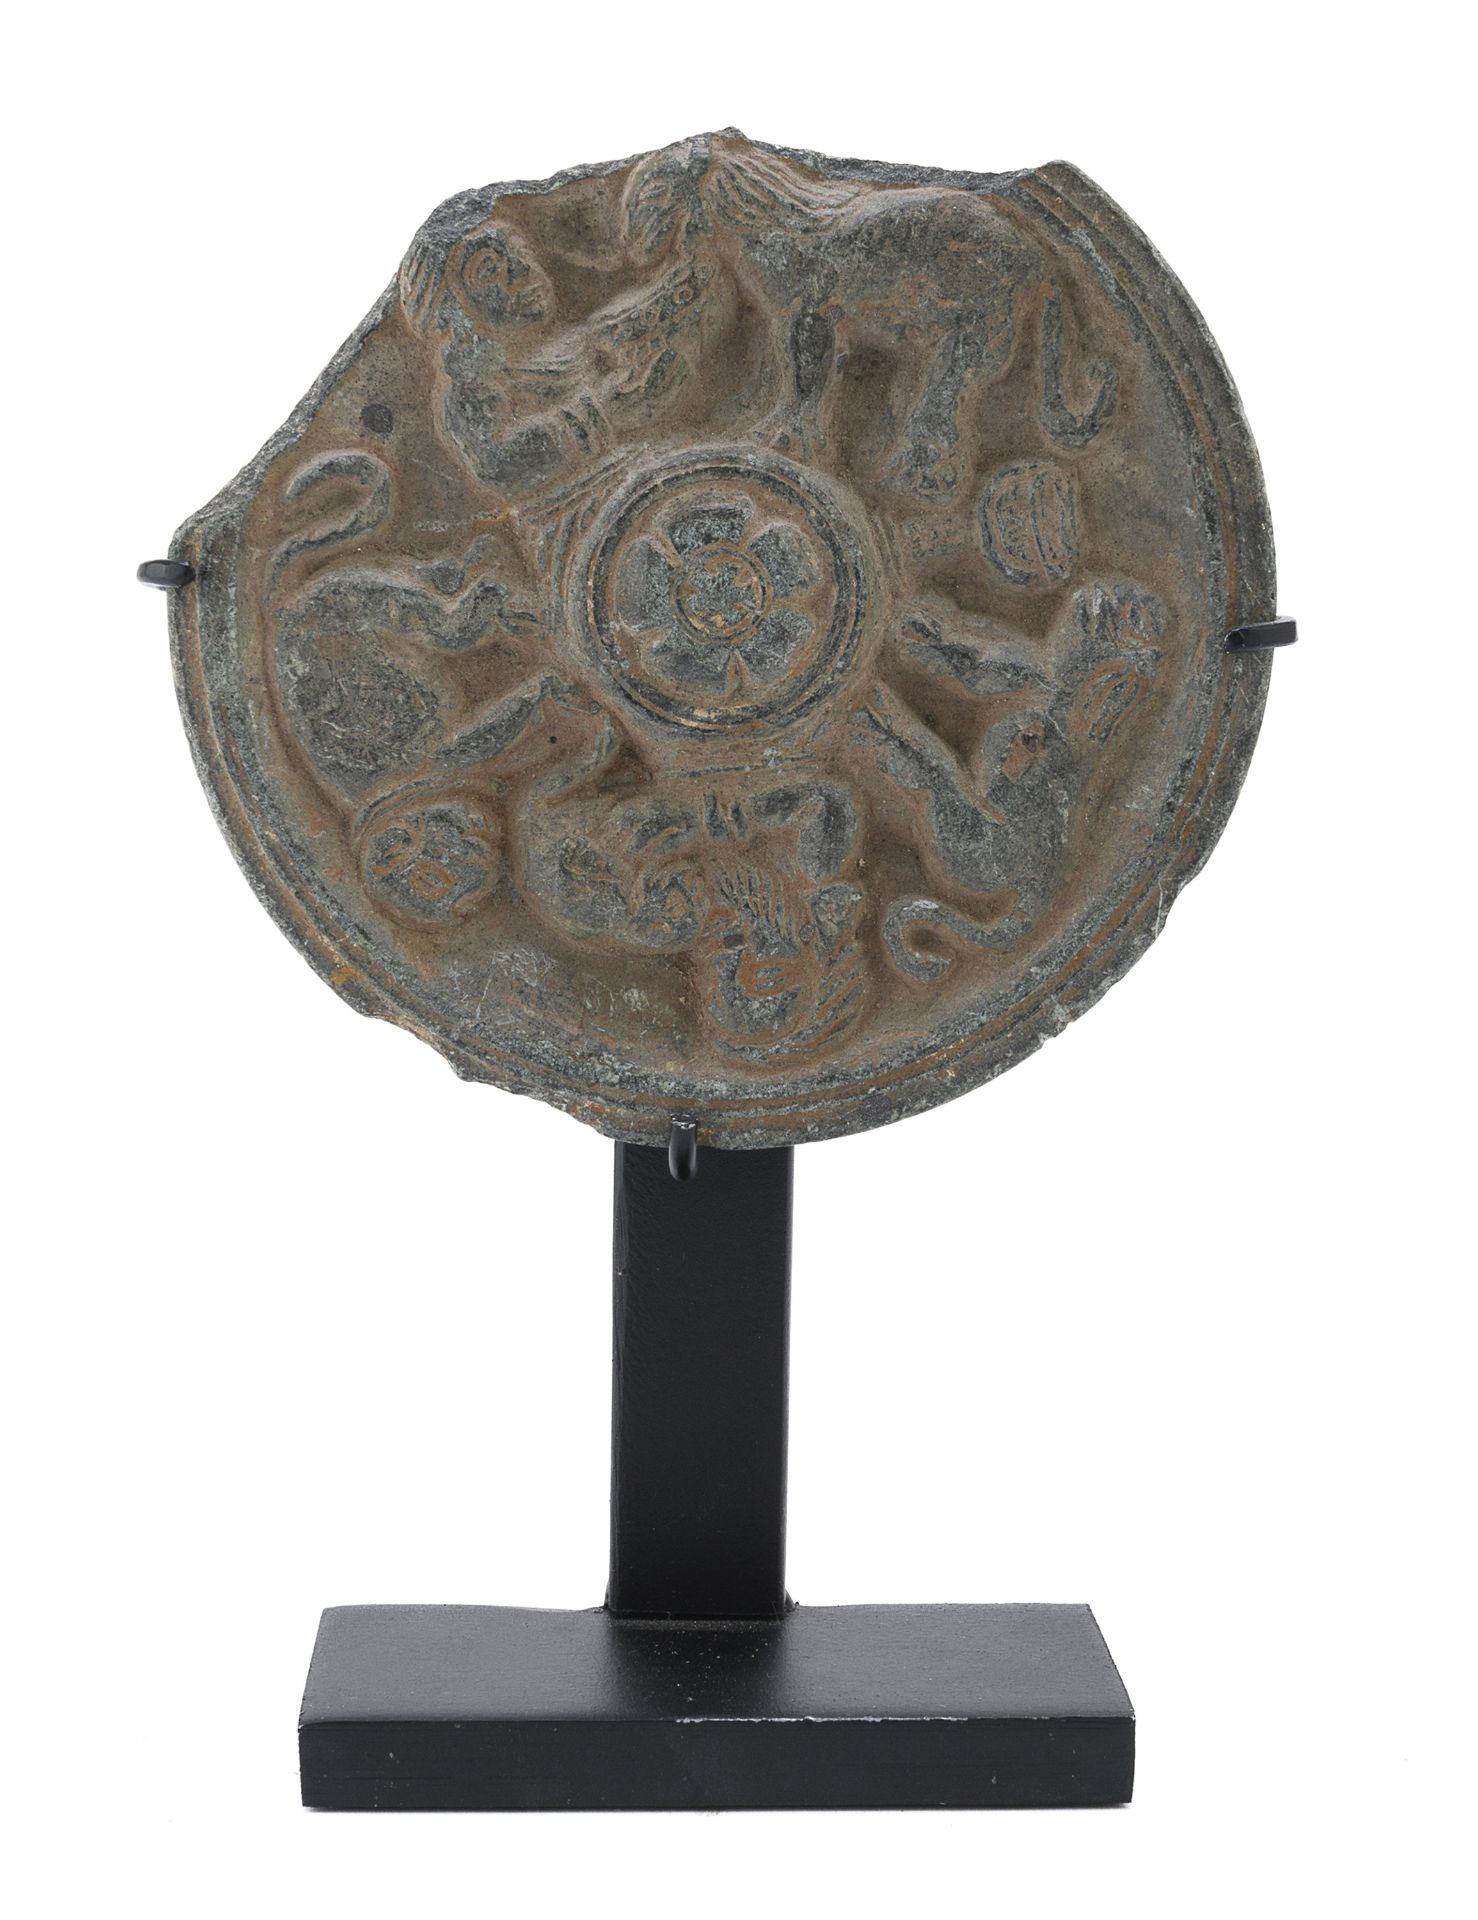 A SMALL SCHIST DISH WITH RITUAL SCENE ART OF GANDHARA 3RD-4TH CENTURY A.C.